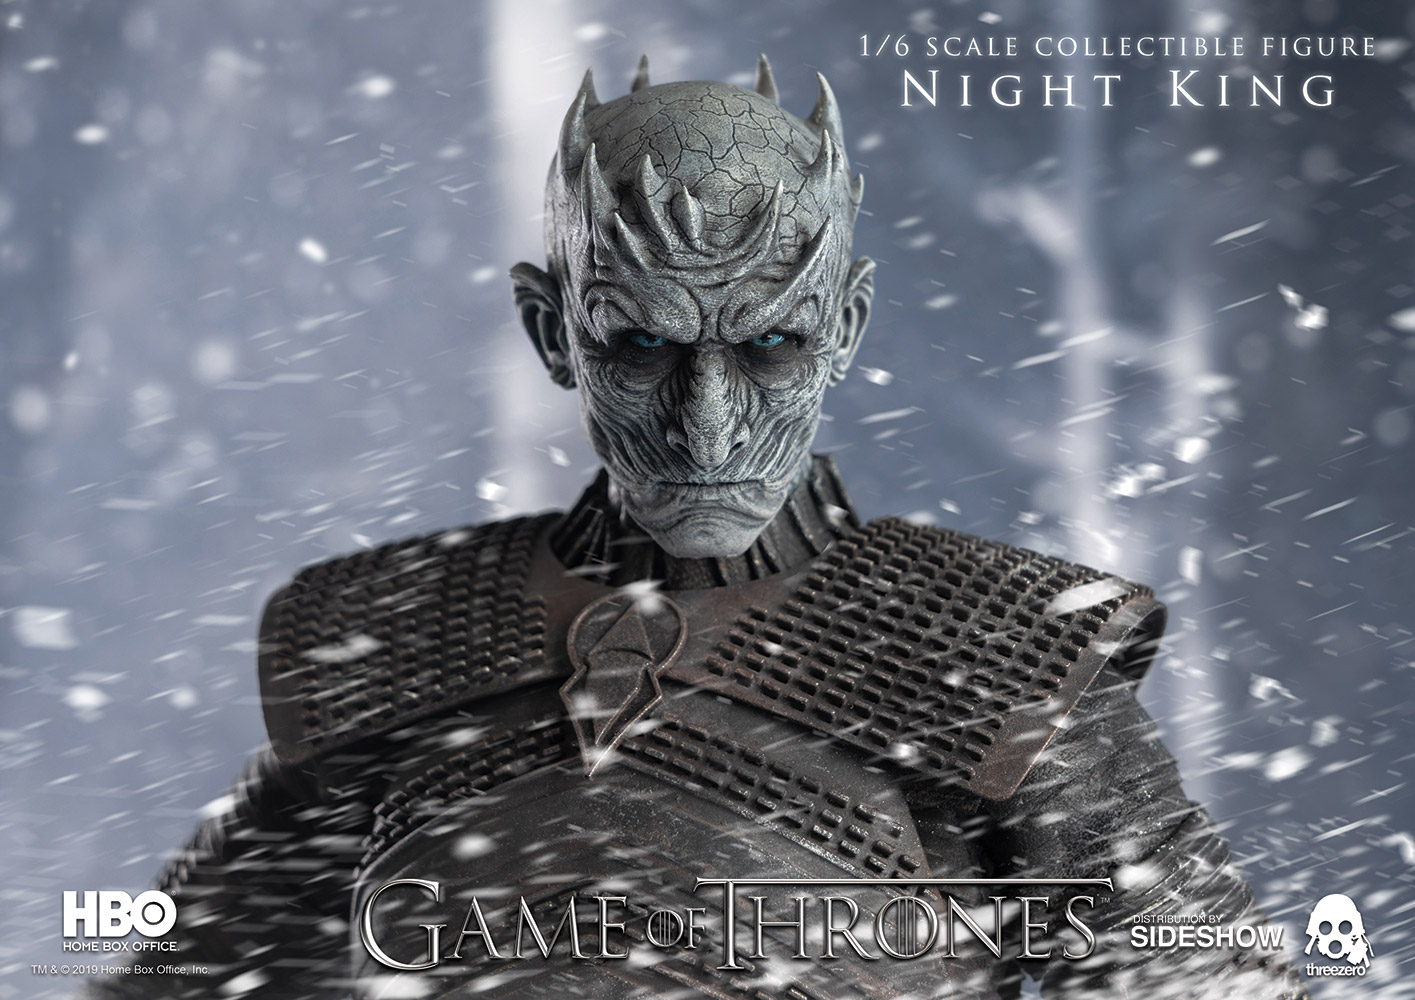 spoilers - STAR WARS Moving On Solo Story Night-king_game-of-thrones_gallery_5d4a1382c0f08